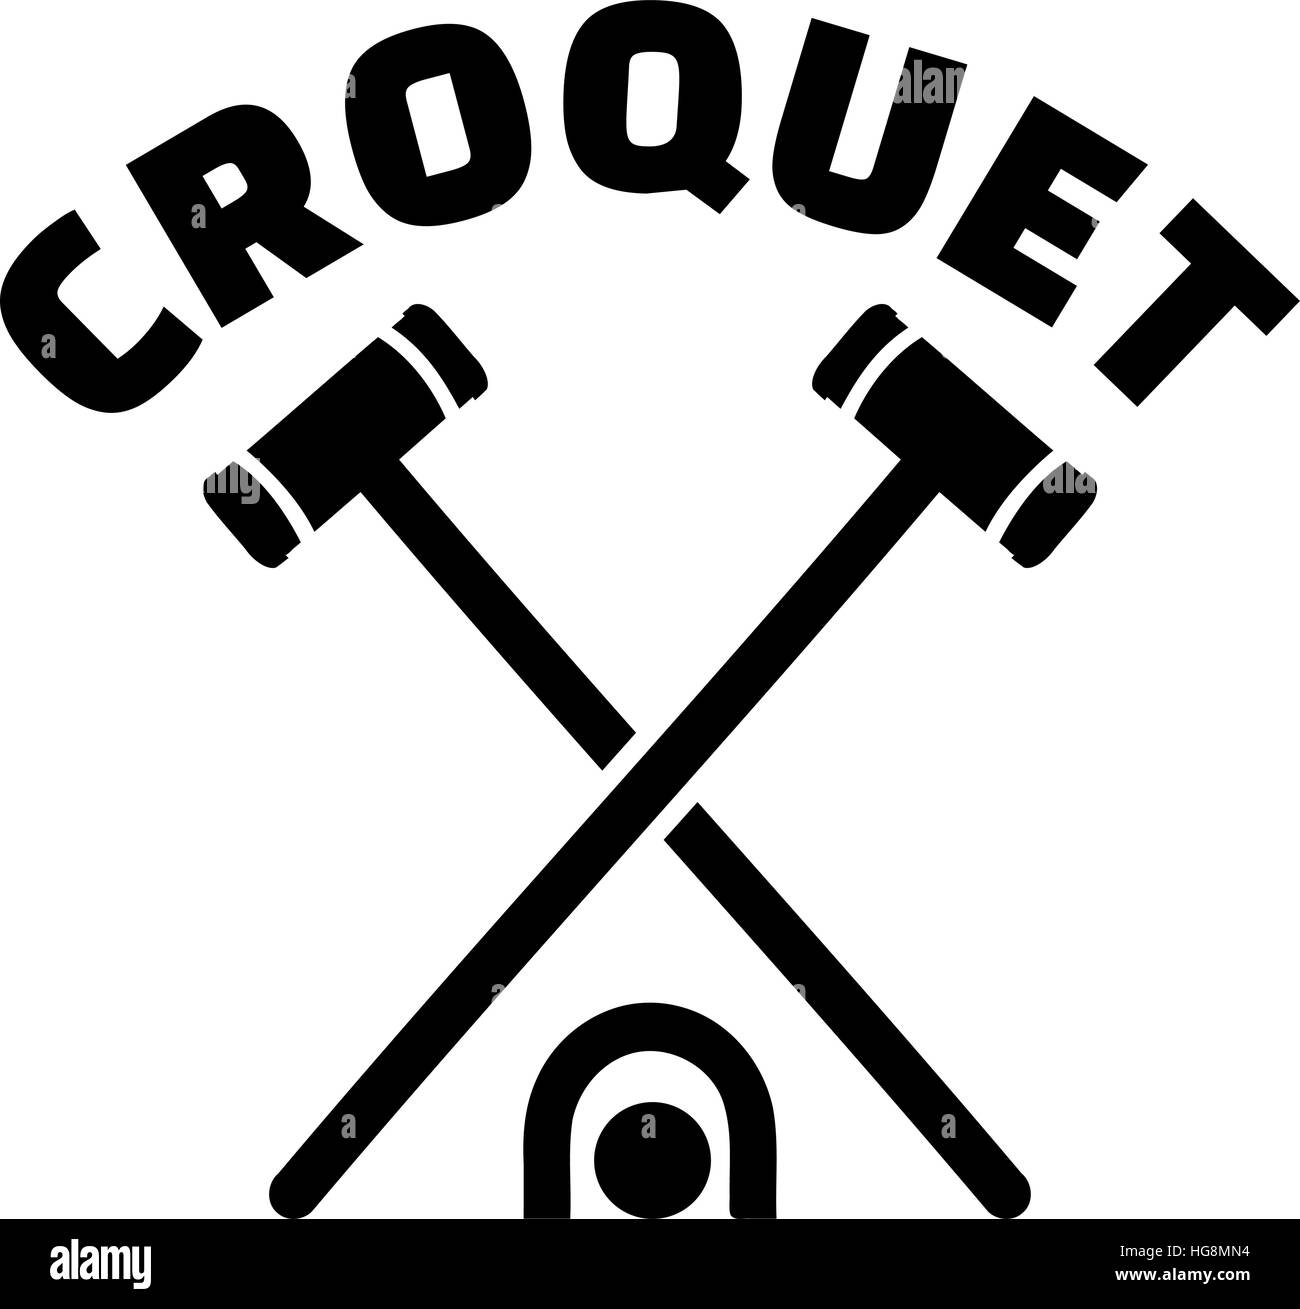 Crossed croquet mallets with word Stock Vector